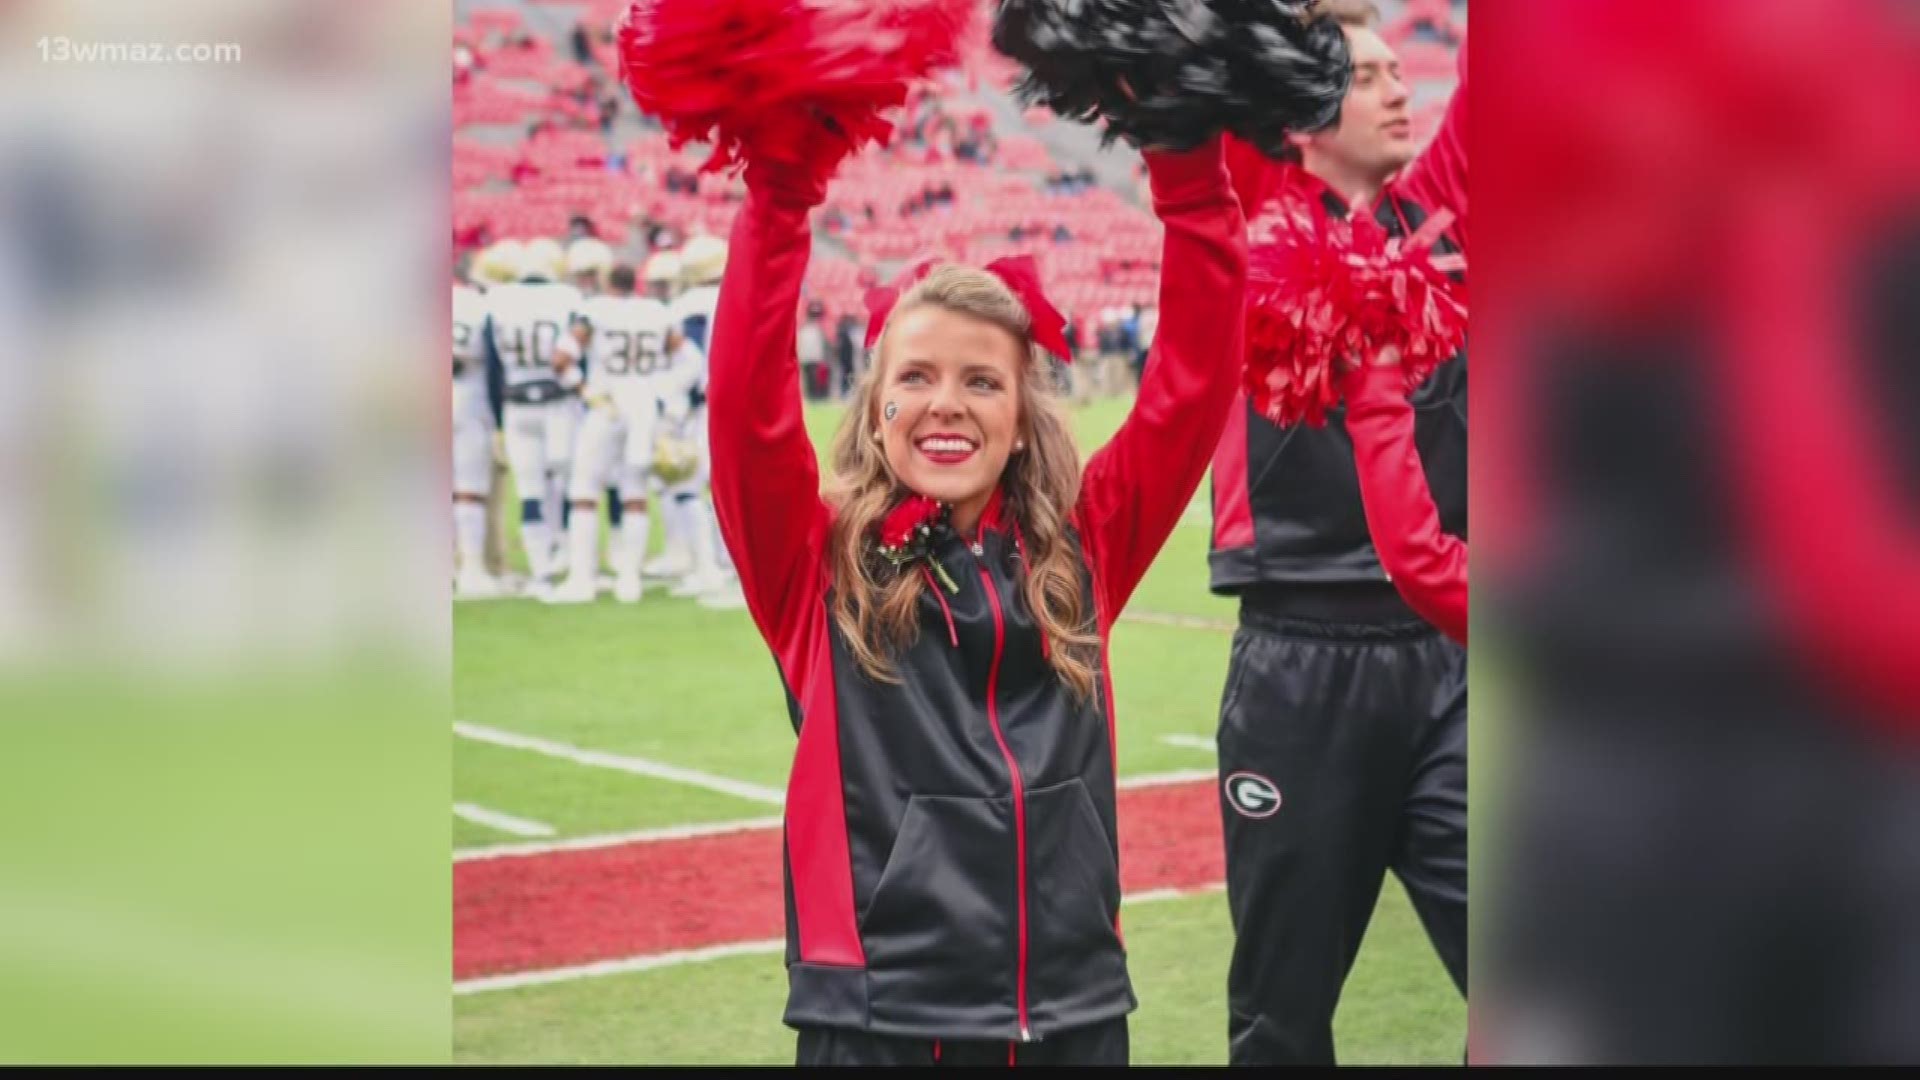 Football season is just getting started, but one UGA cheerleader had to hang up her pom-poms this season because of health problems.